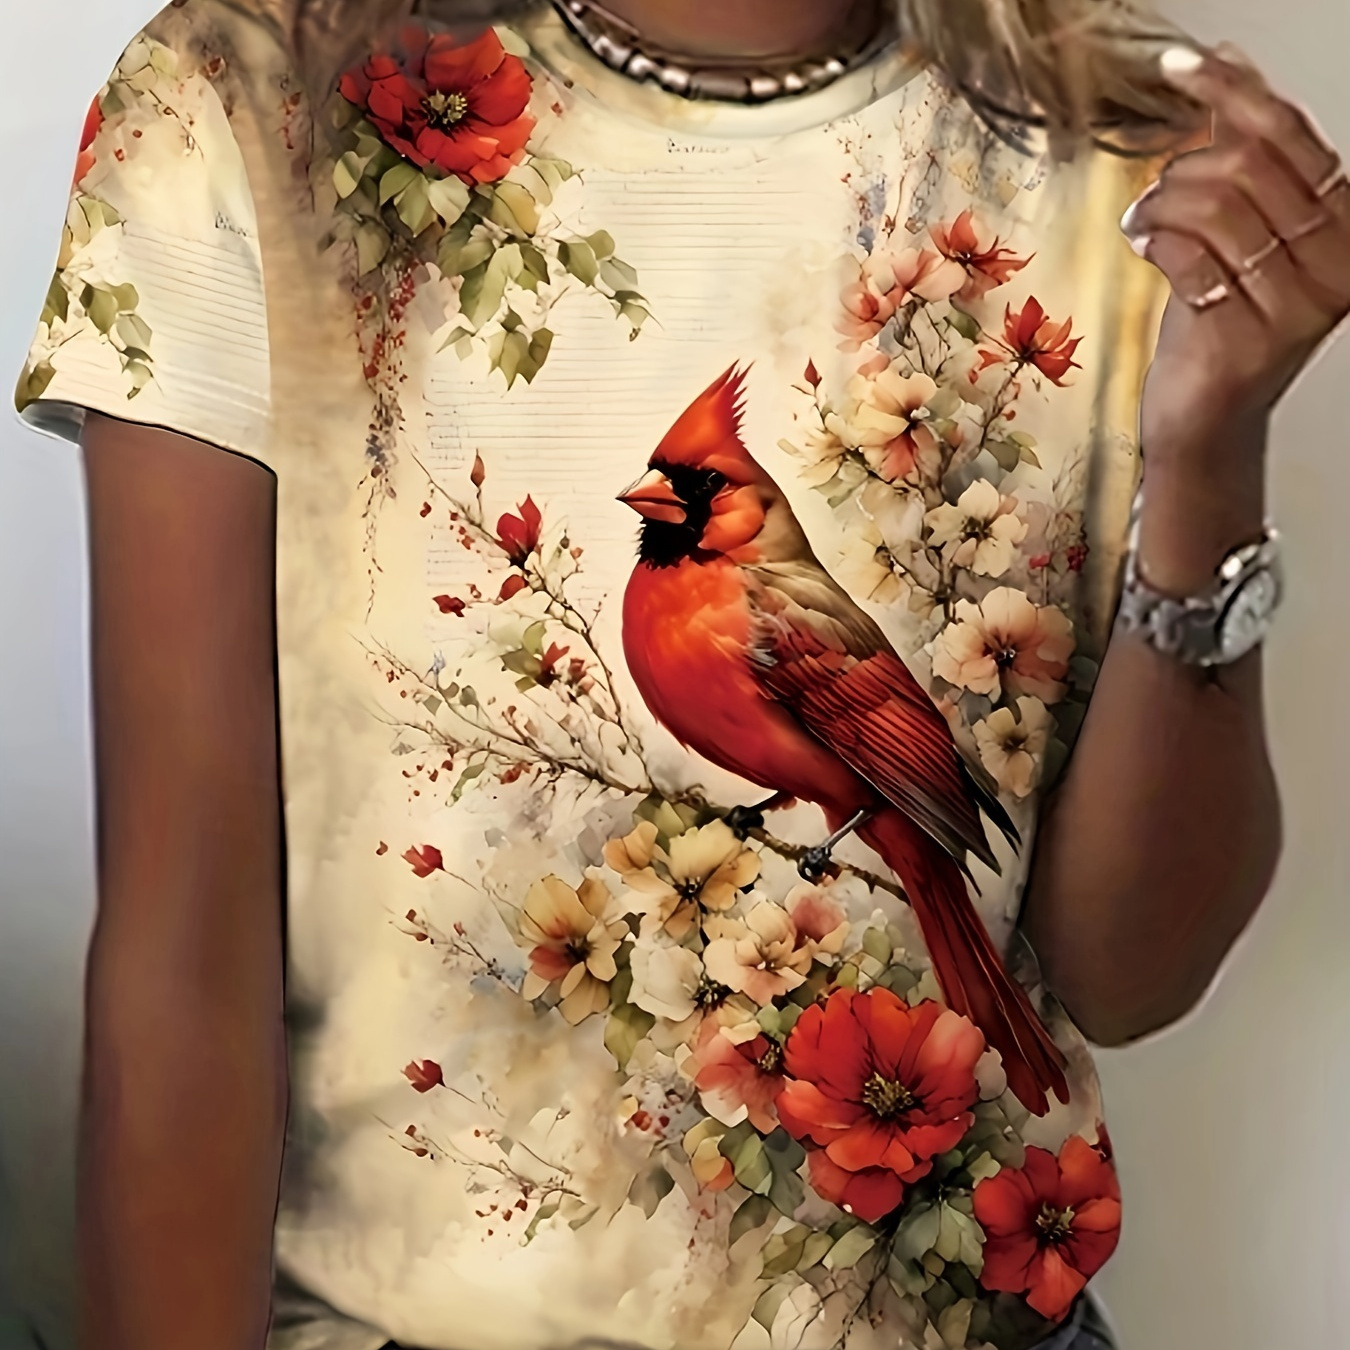 

Floral & Bird Print Crew Neck T-shirt, Casual Short Sleeve Top For Spring & Summer, Women's Clothing